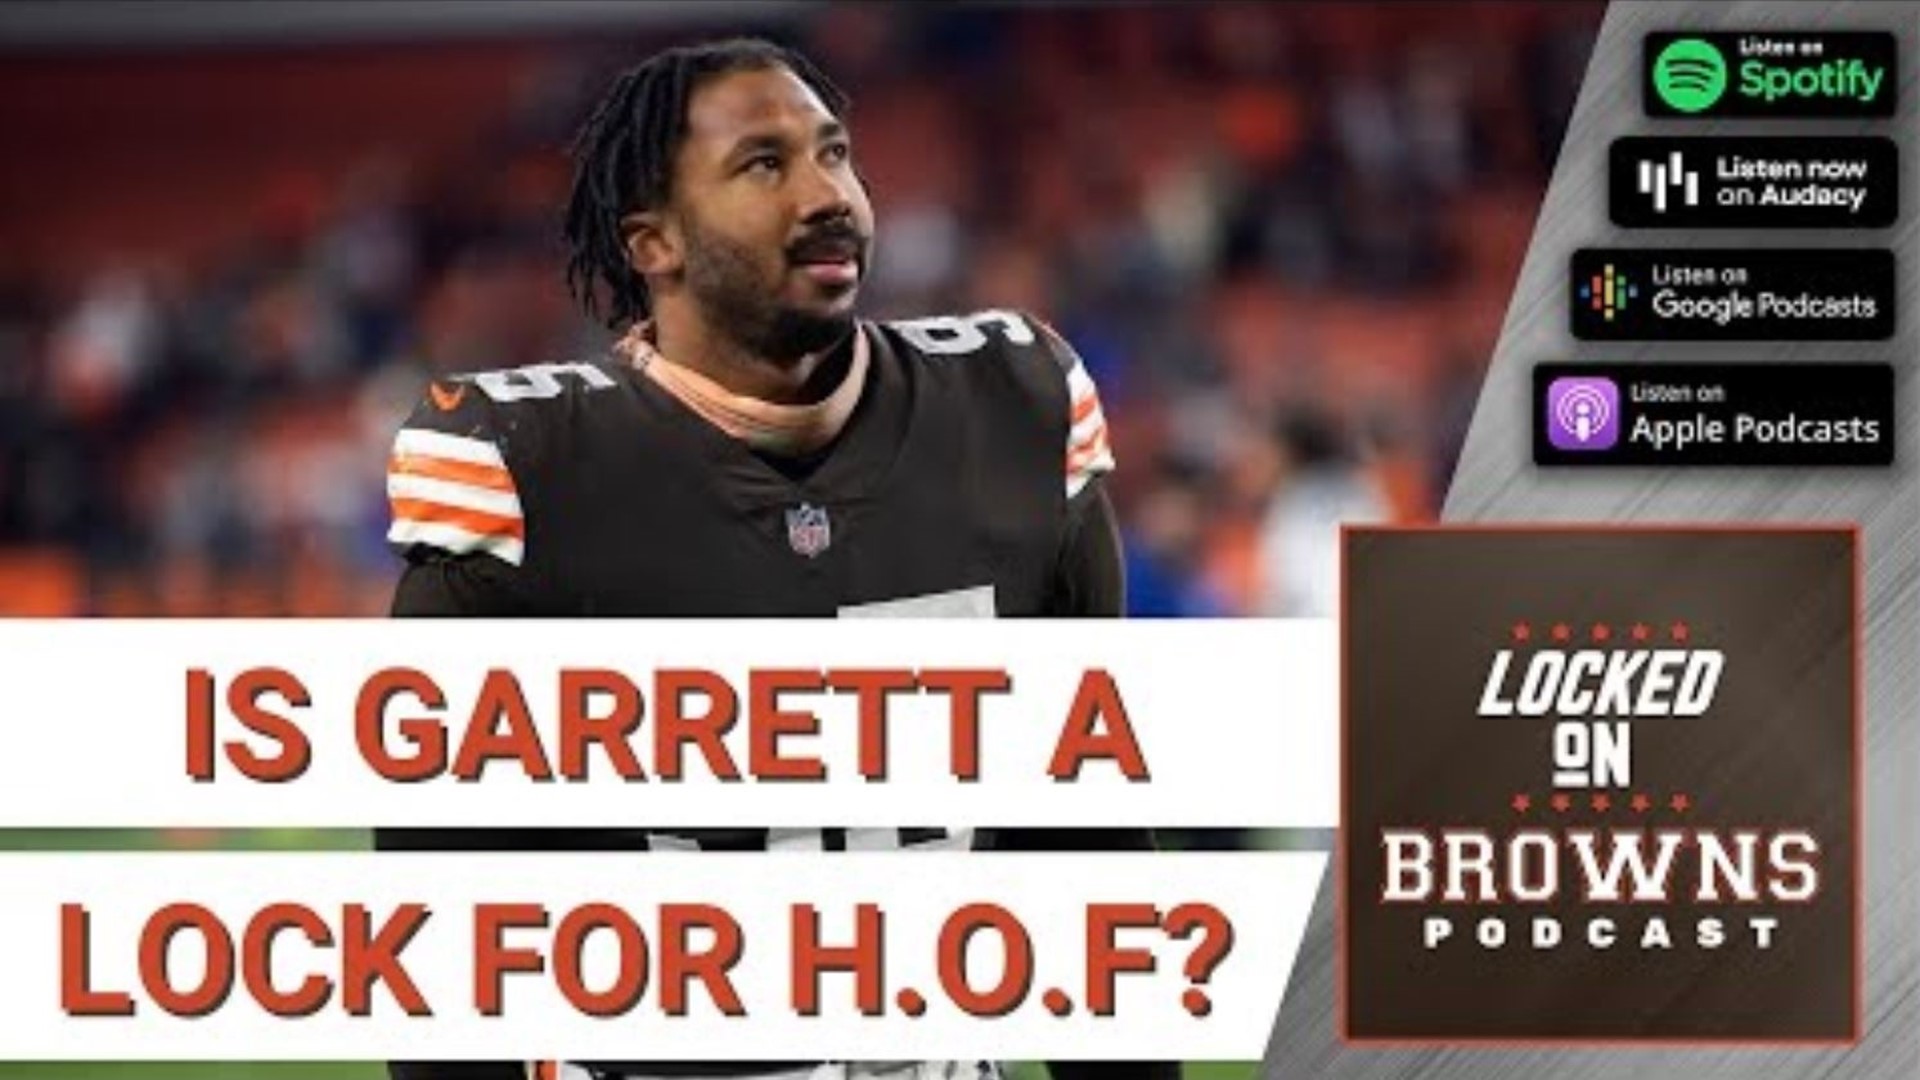 Myles Garrett declined to go to the Pro Football Hall of Fame explaining that one day he would like to be inducted and didn't want to be there prematurely.